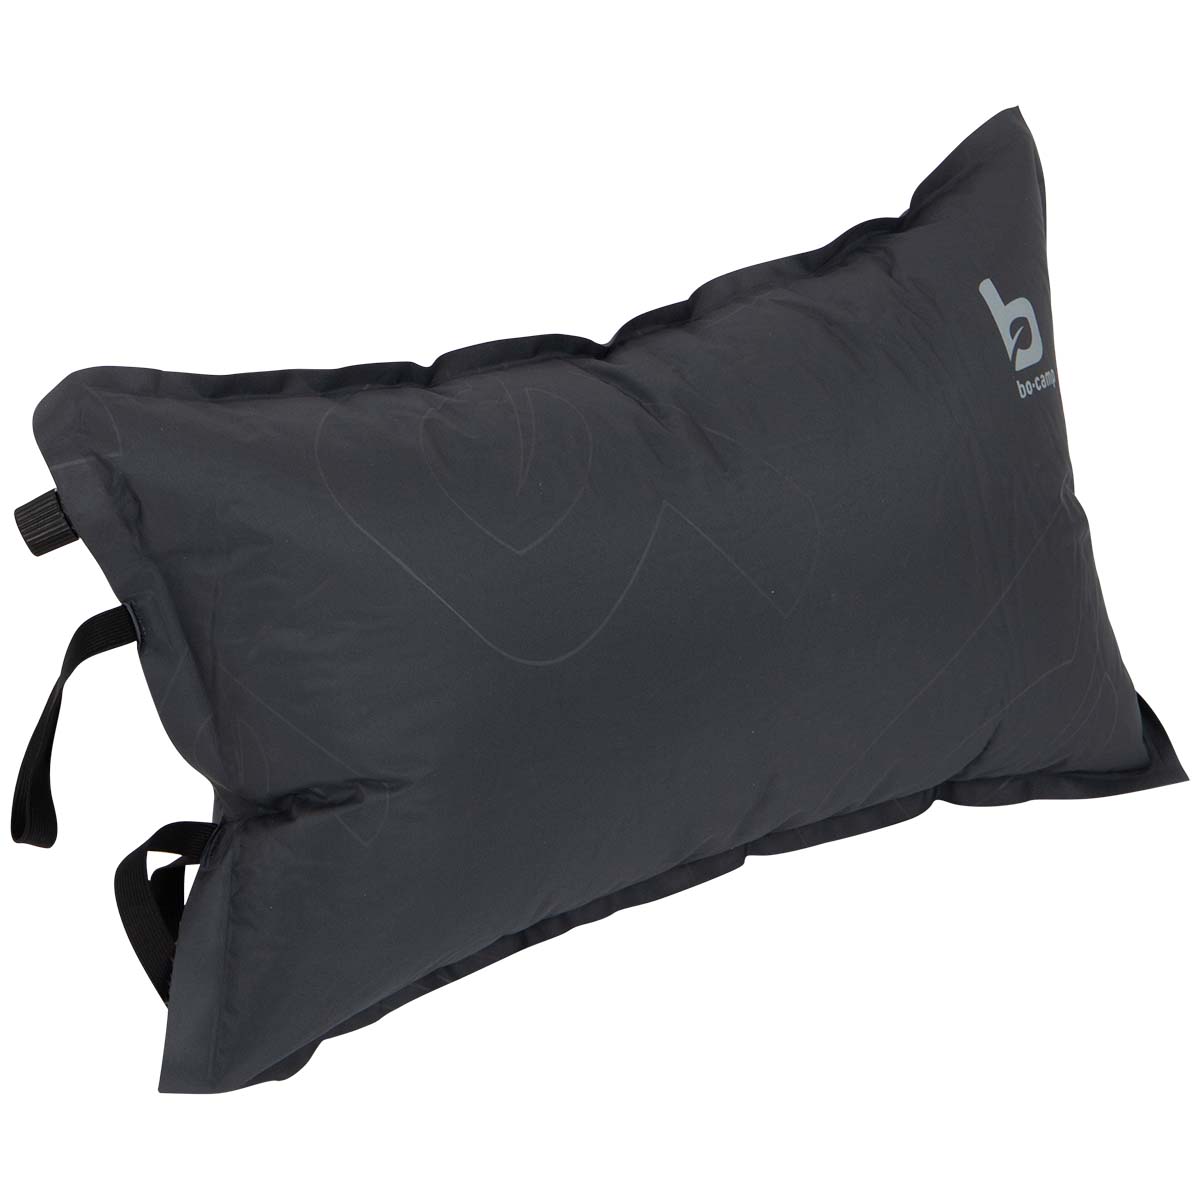 3400004 A comfortable self-inflating pillow. A durable pillow that is made from soft and high quality 75D Soft Touch polyester. Equipped with a brass valve. Can be rolled up compactly to carry.